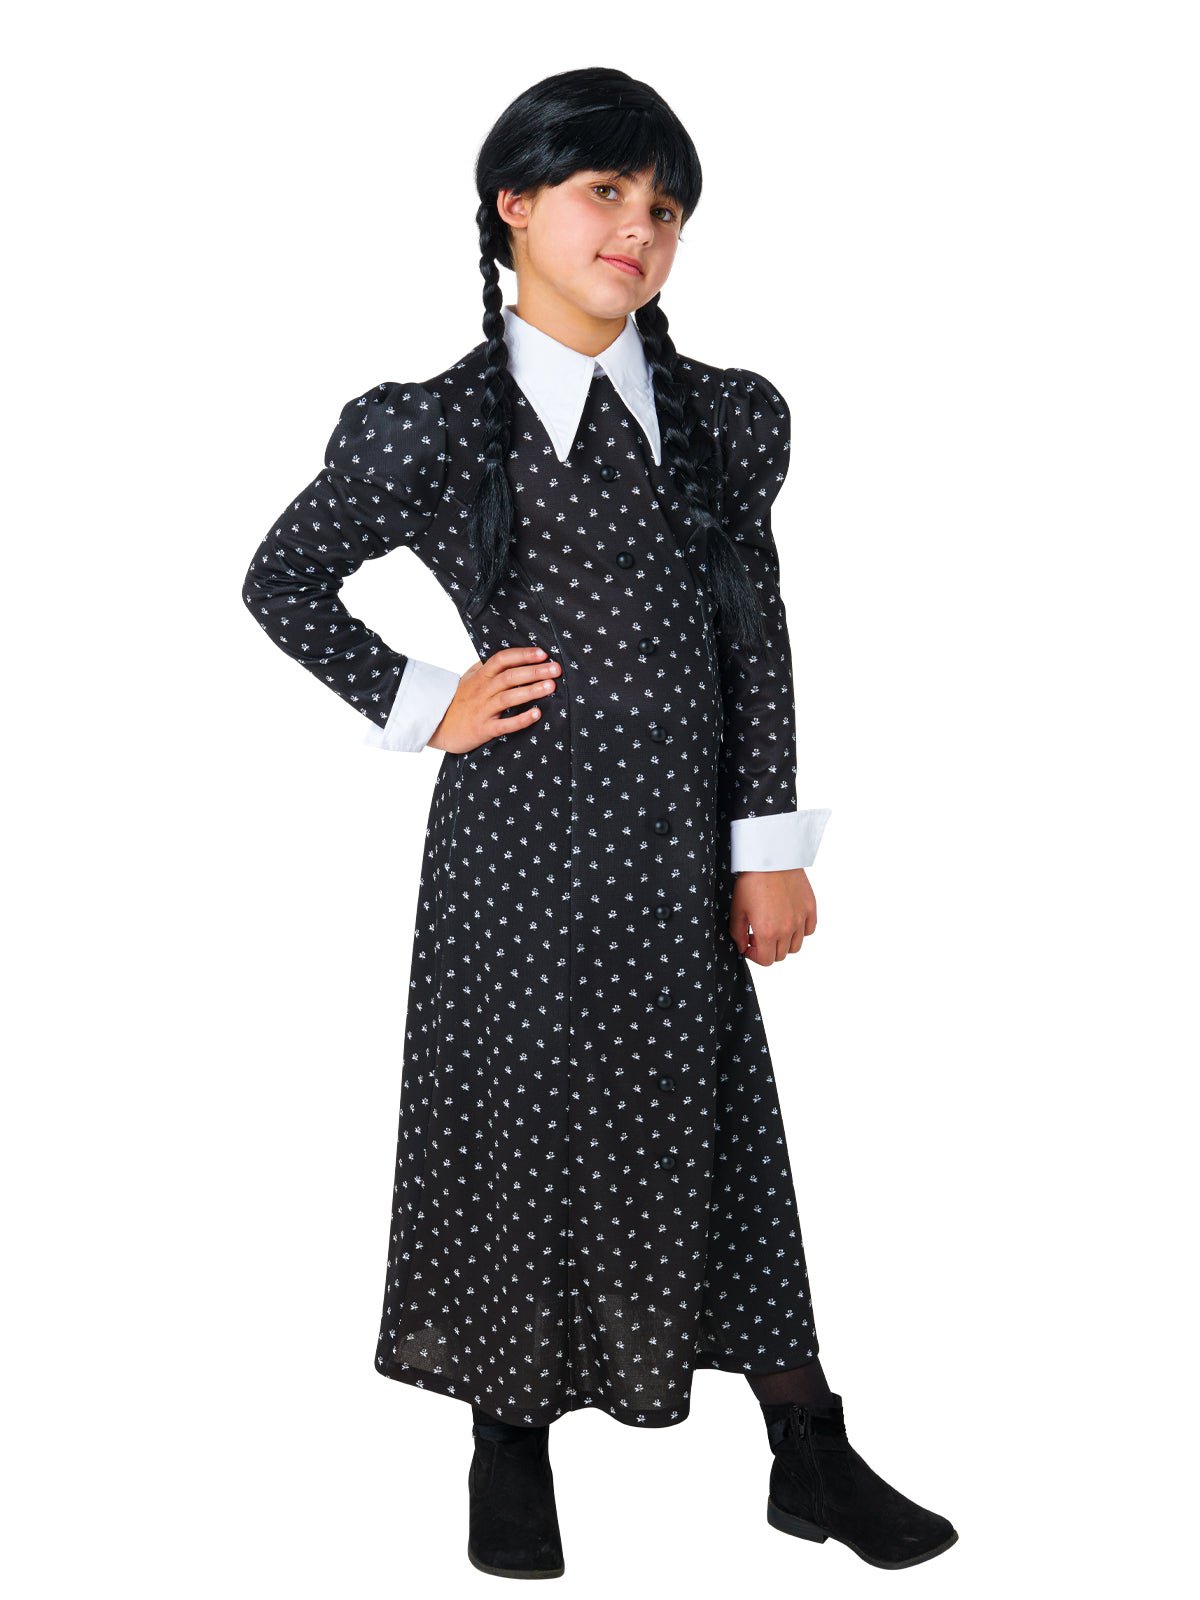 Wednesday Addams Comes to Life: Deluxe Costume for Kids - Netflix Series